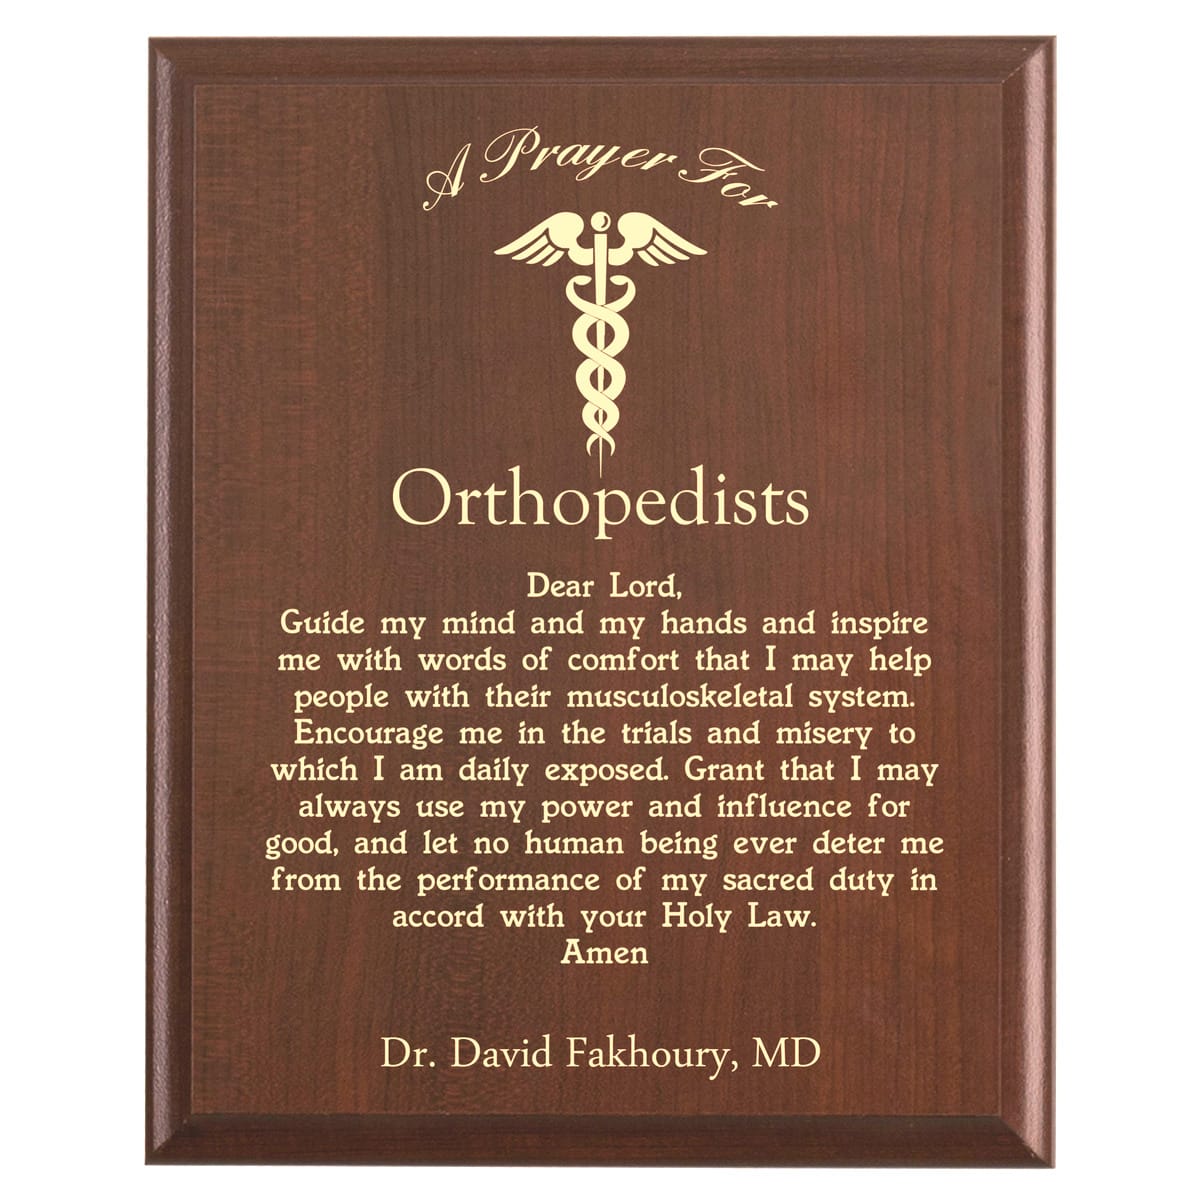 Plaque photo: Orthopedist Prayer Plaque design with free personalization. Wood style finish with customized text.